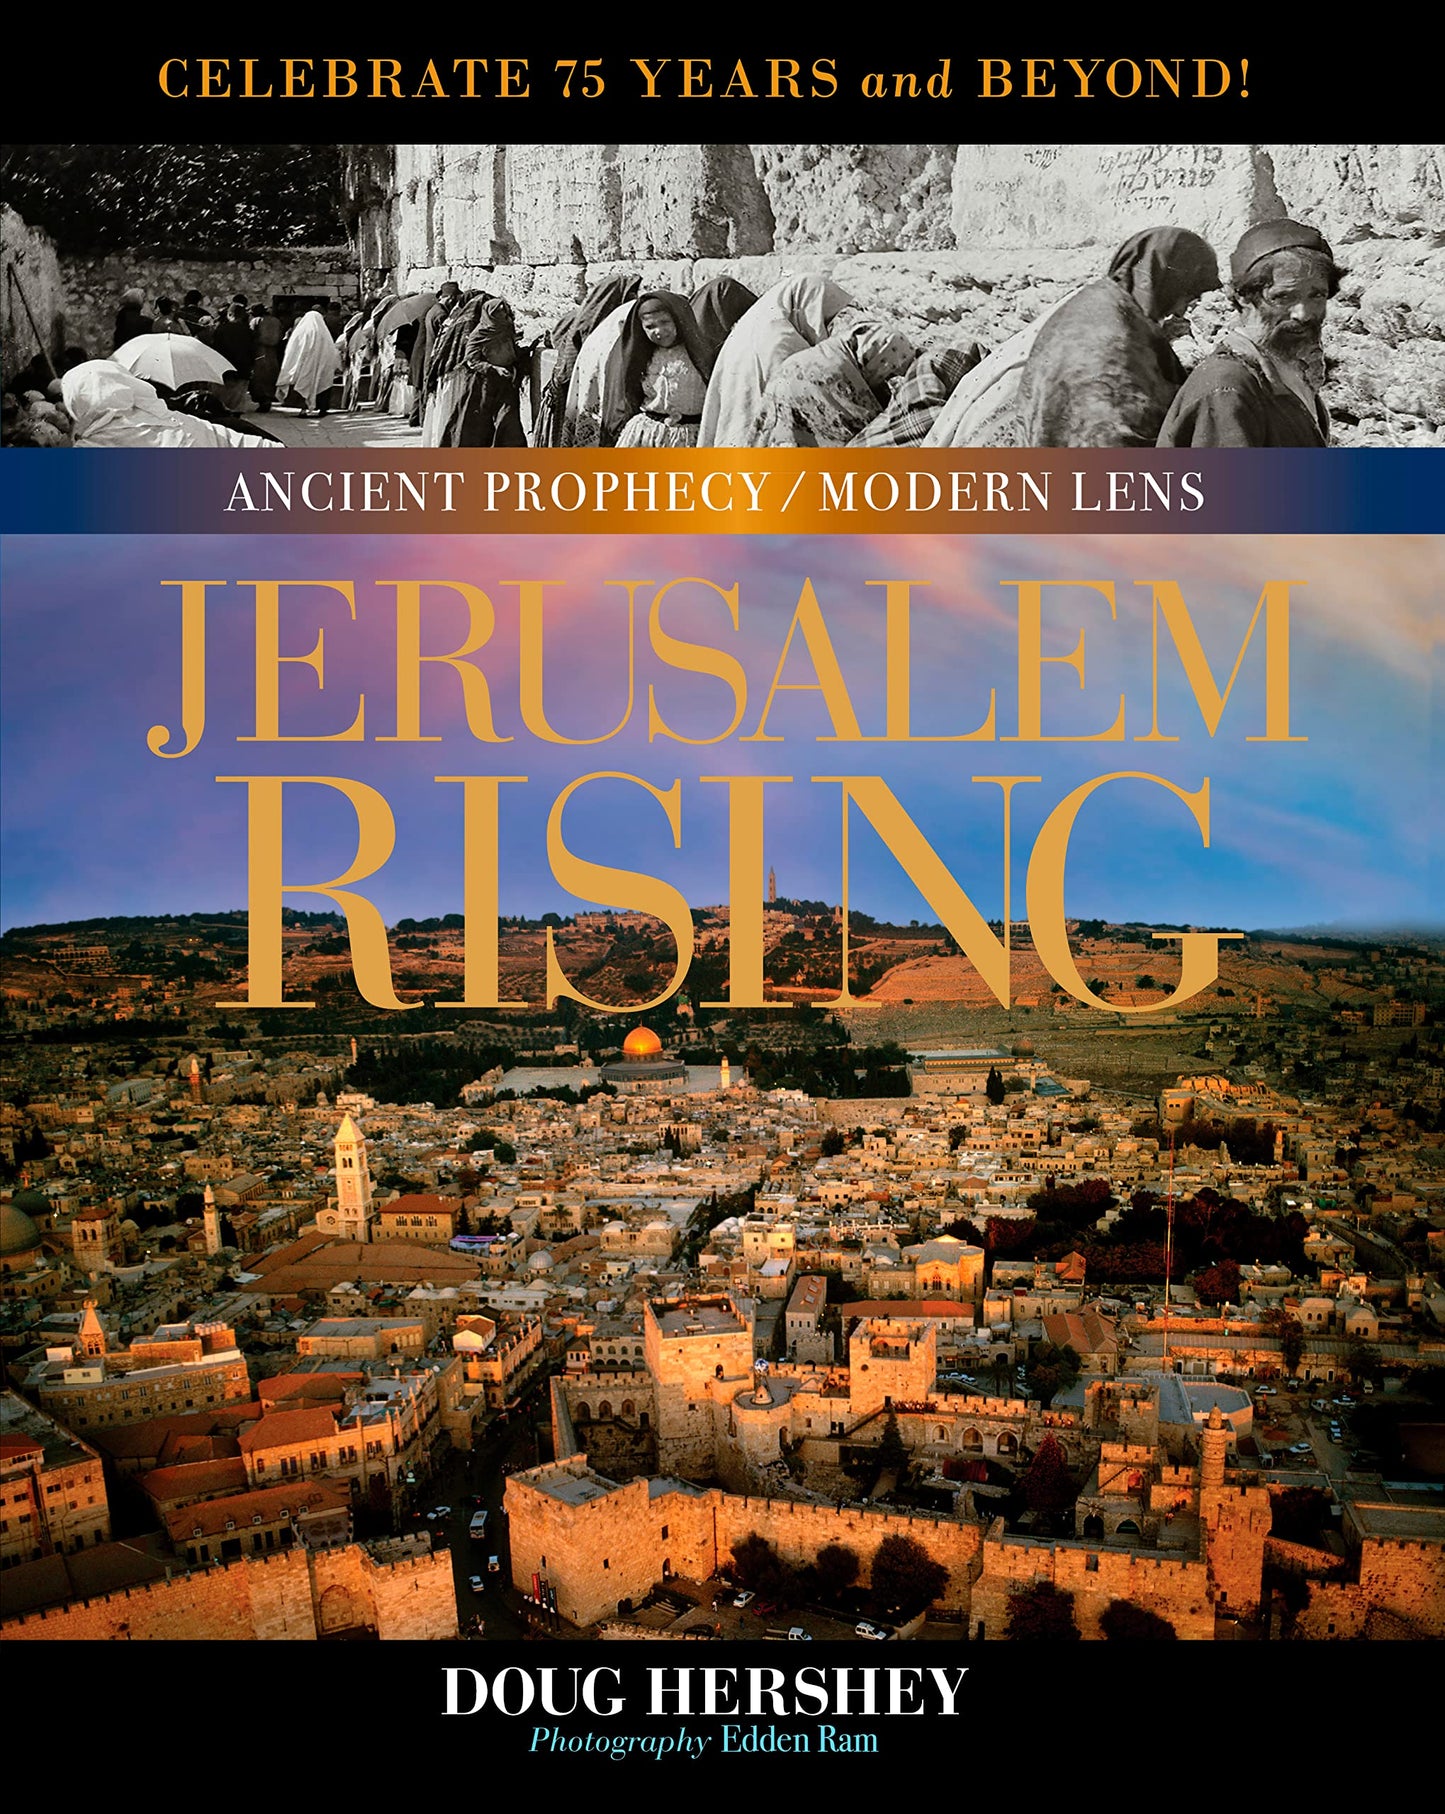 Jerusalem Rising: The City of Peace Reawakens (Ancient Prophecy / Modern Lens)